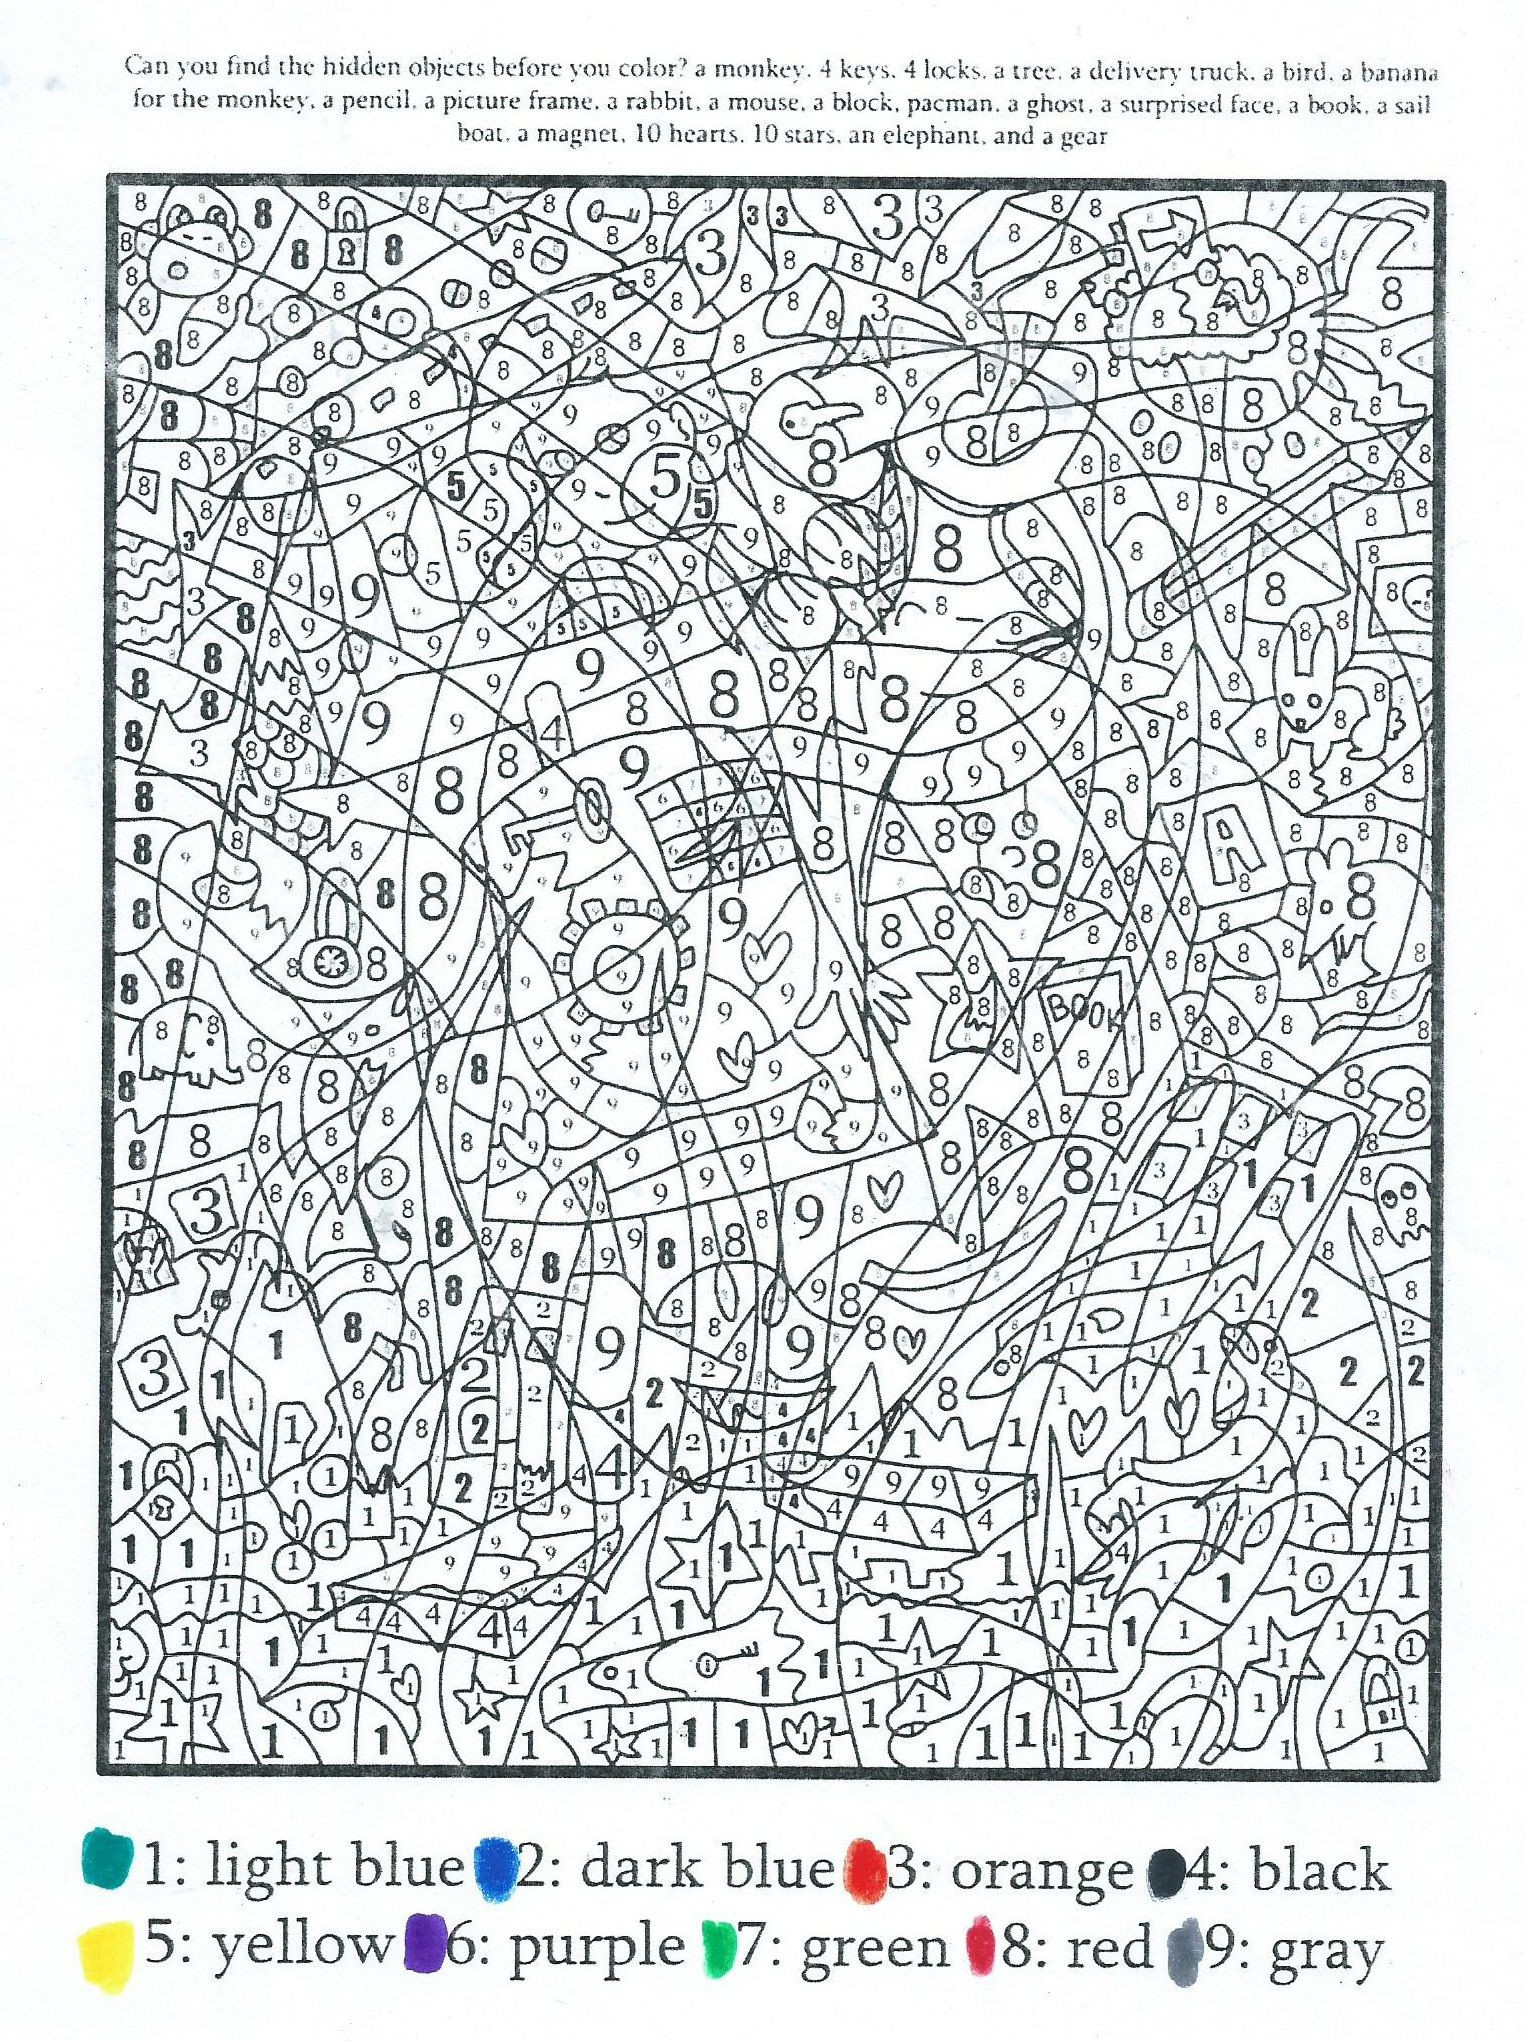 Coloring Pages For Adults Difficult
 Pin by Elizabeth McCarthy on zantangles & drawings